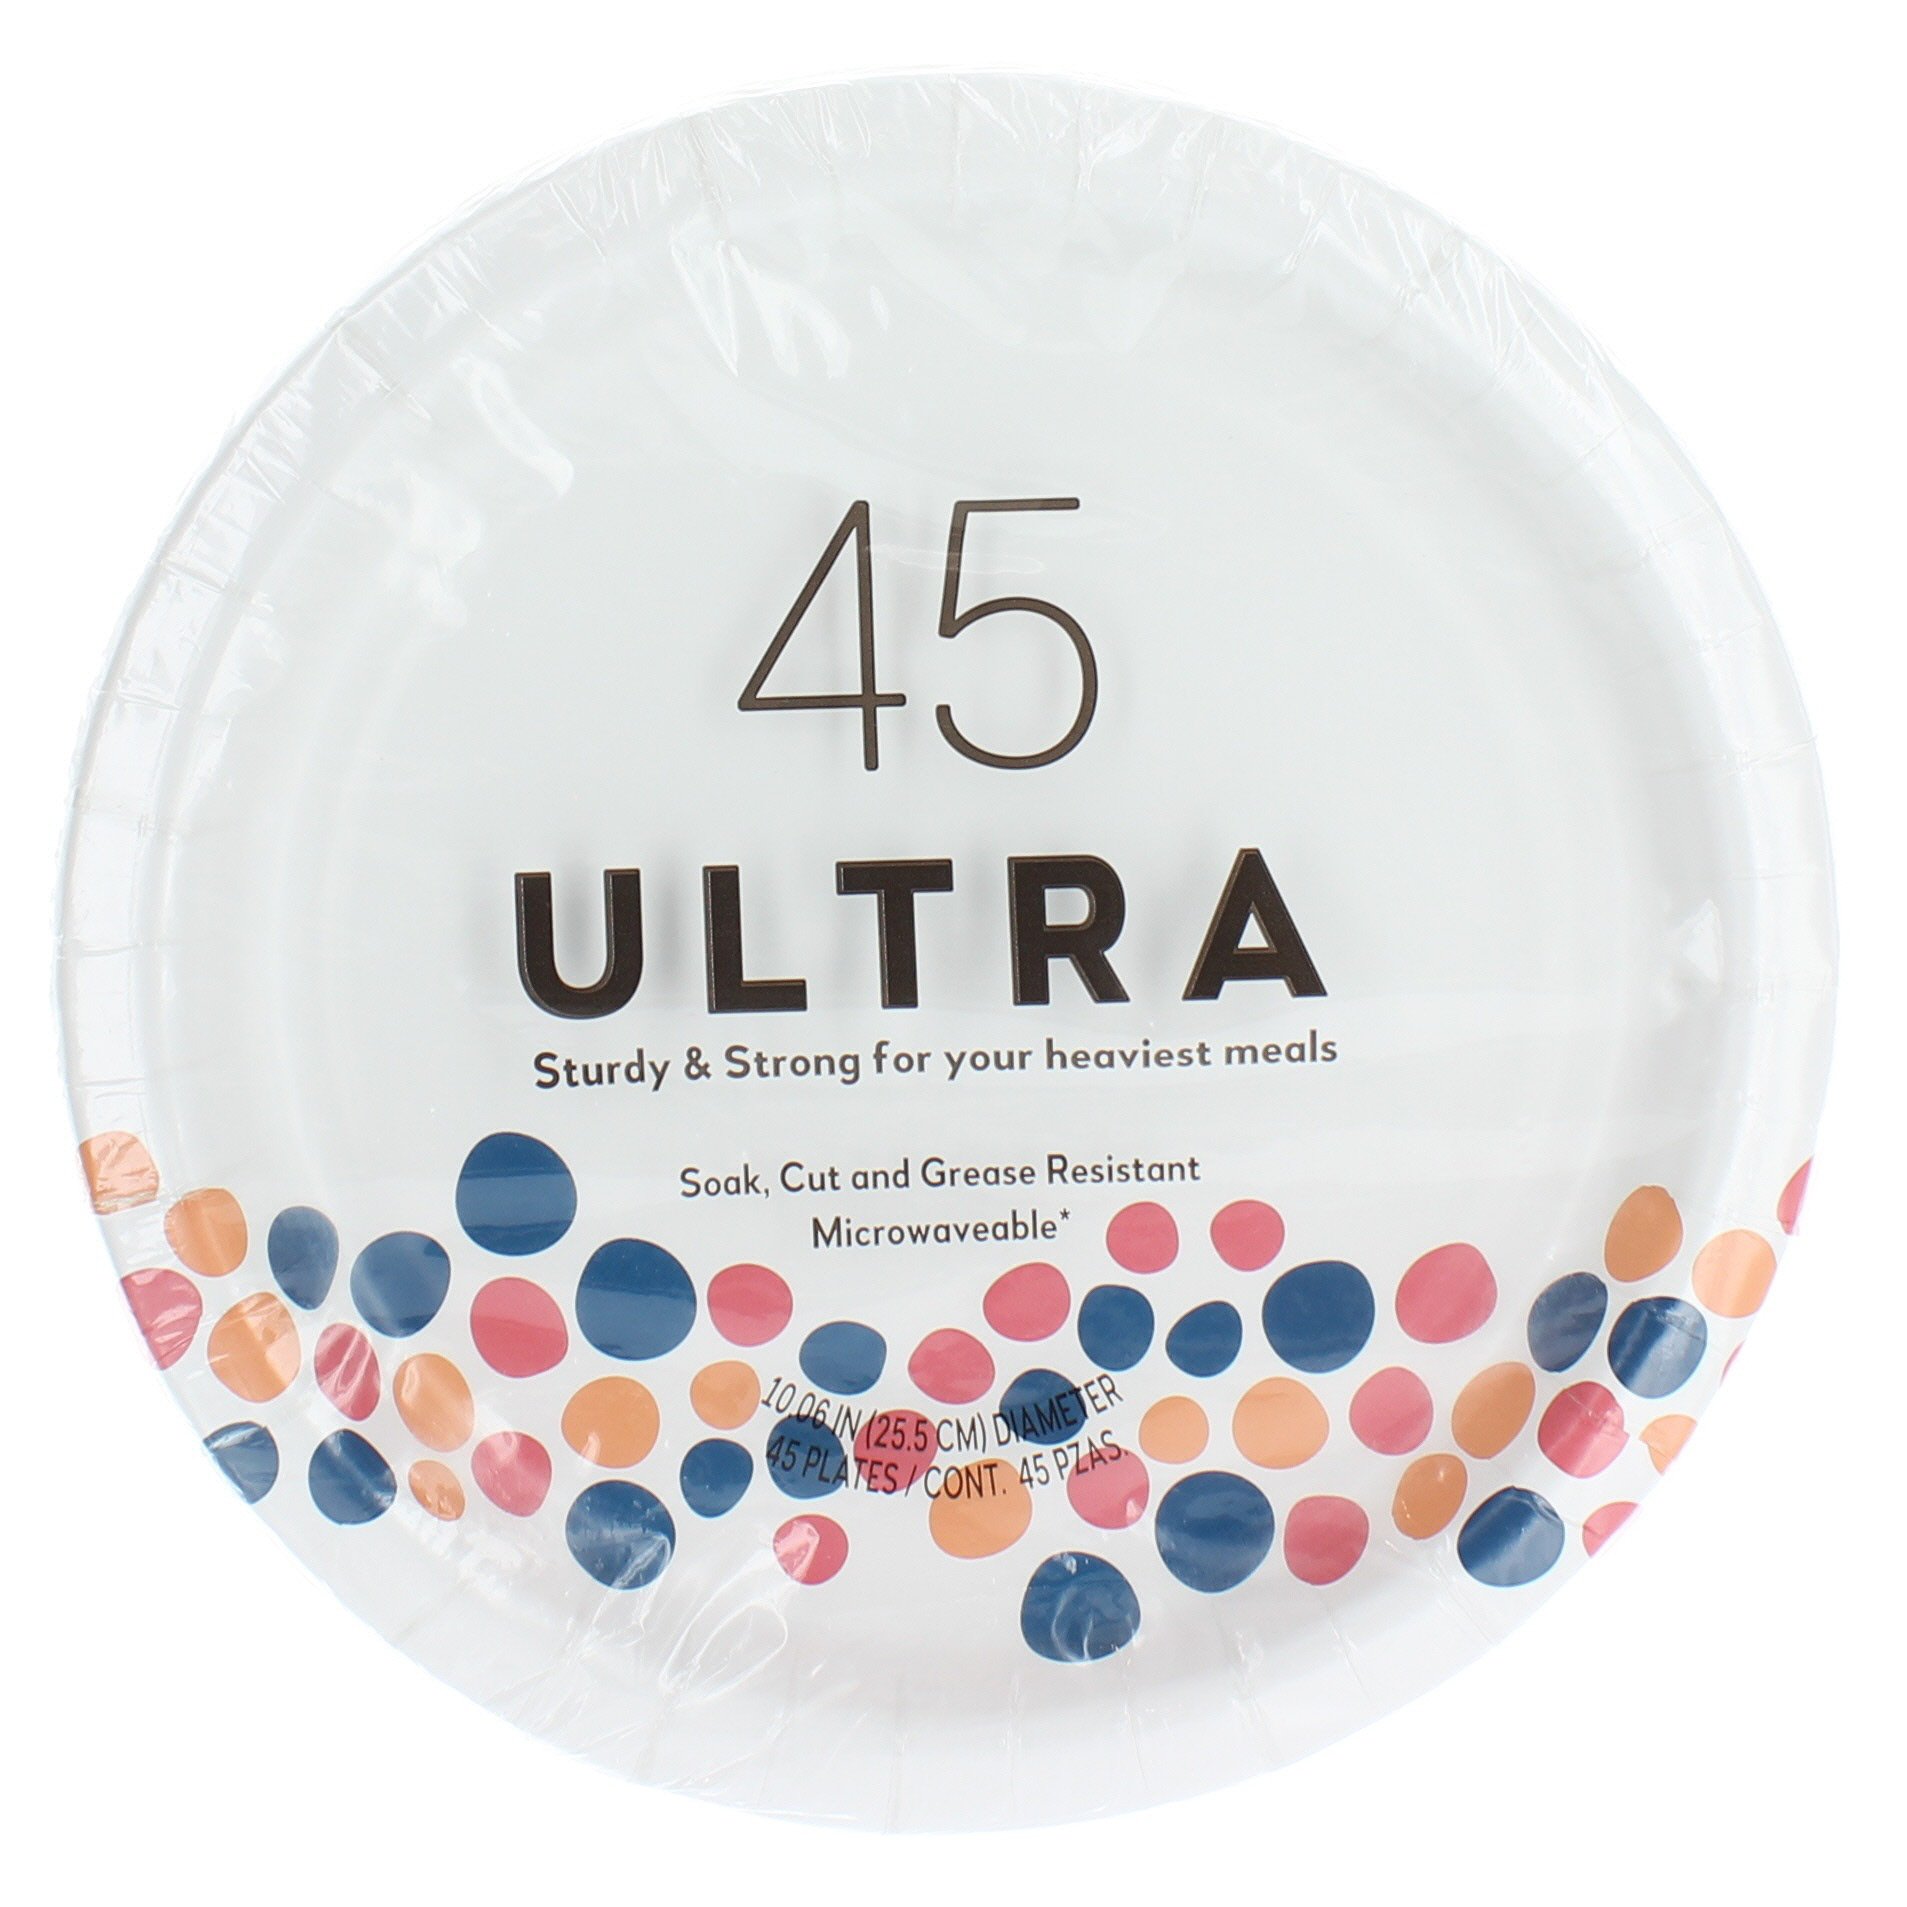 Dixie Ultra Printed 6.8 in Paper Plates - Shop Plates & Bowls at H-E-B